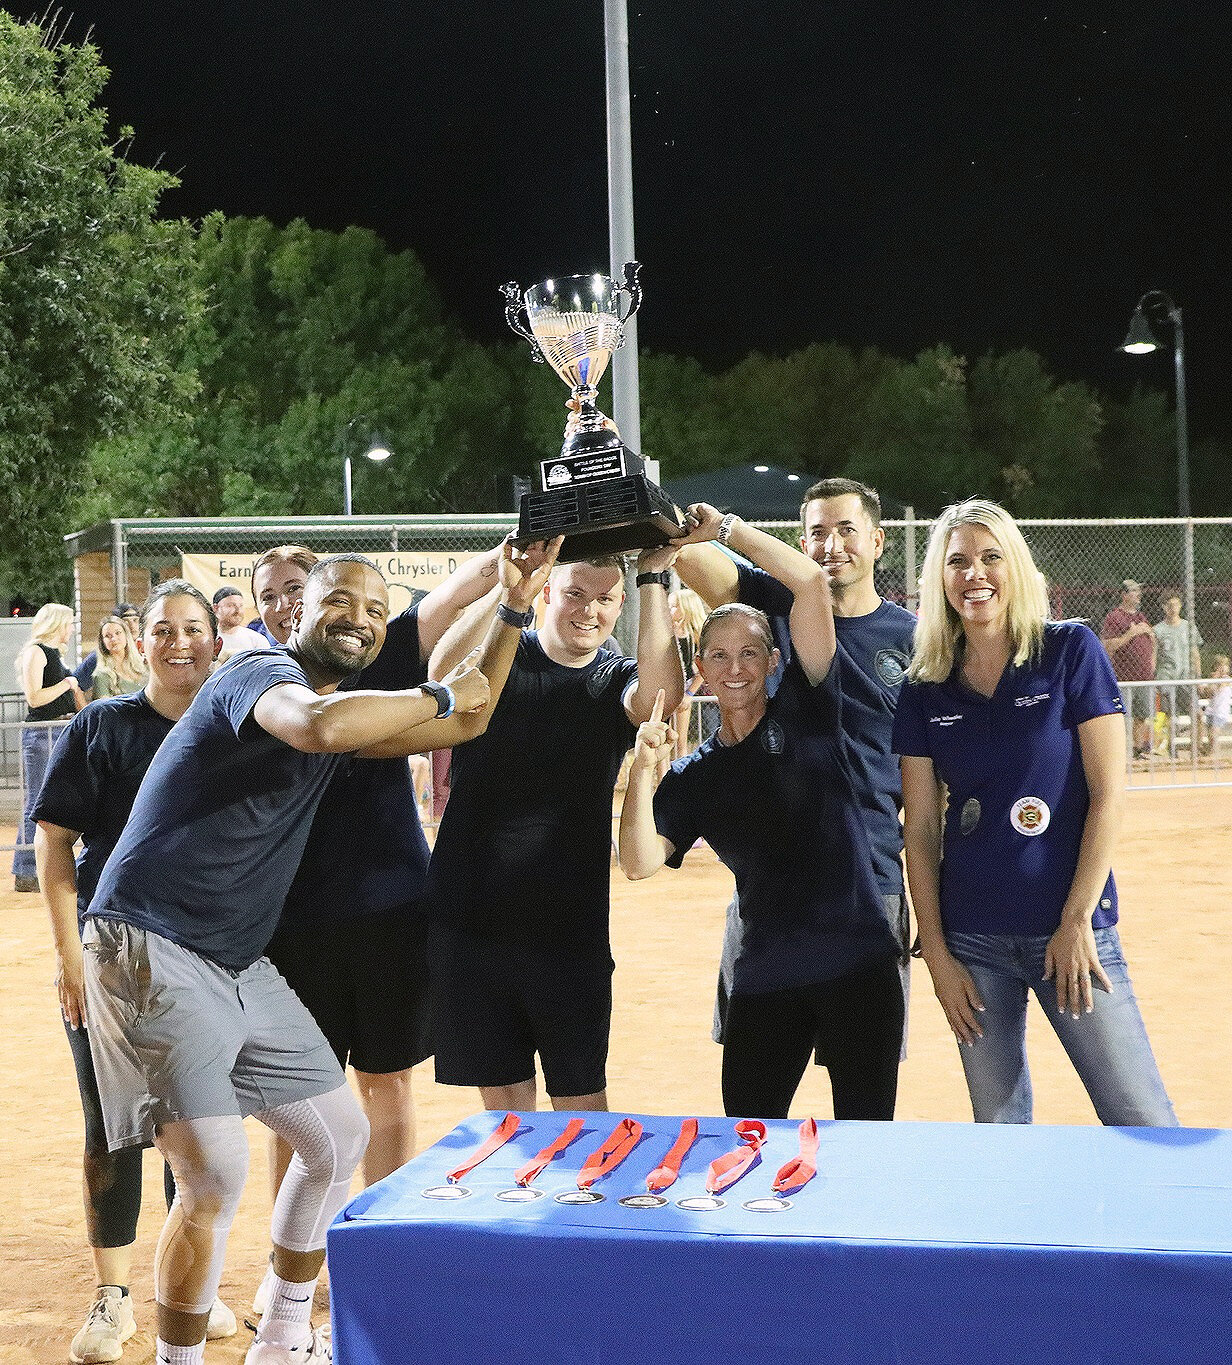 Members of the Queen Creek Police Department hold up their Battle of the Badge trophy, which they won during Founders’ Day celebrations. Queen Creek Mayor Julia Wheatley, far right, congratulated the team.